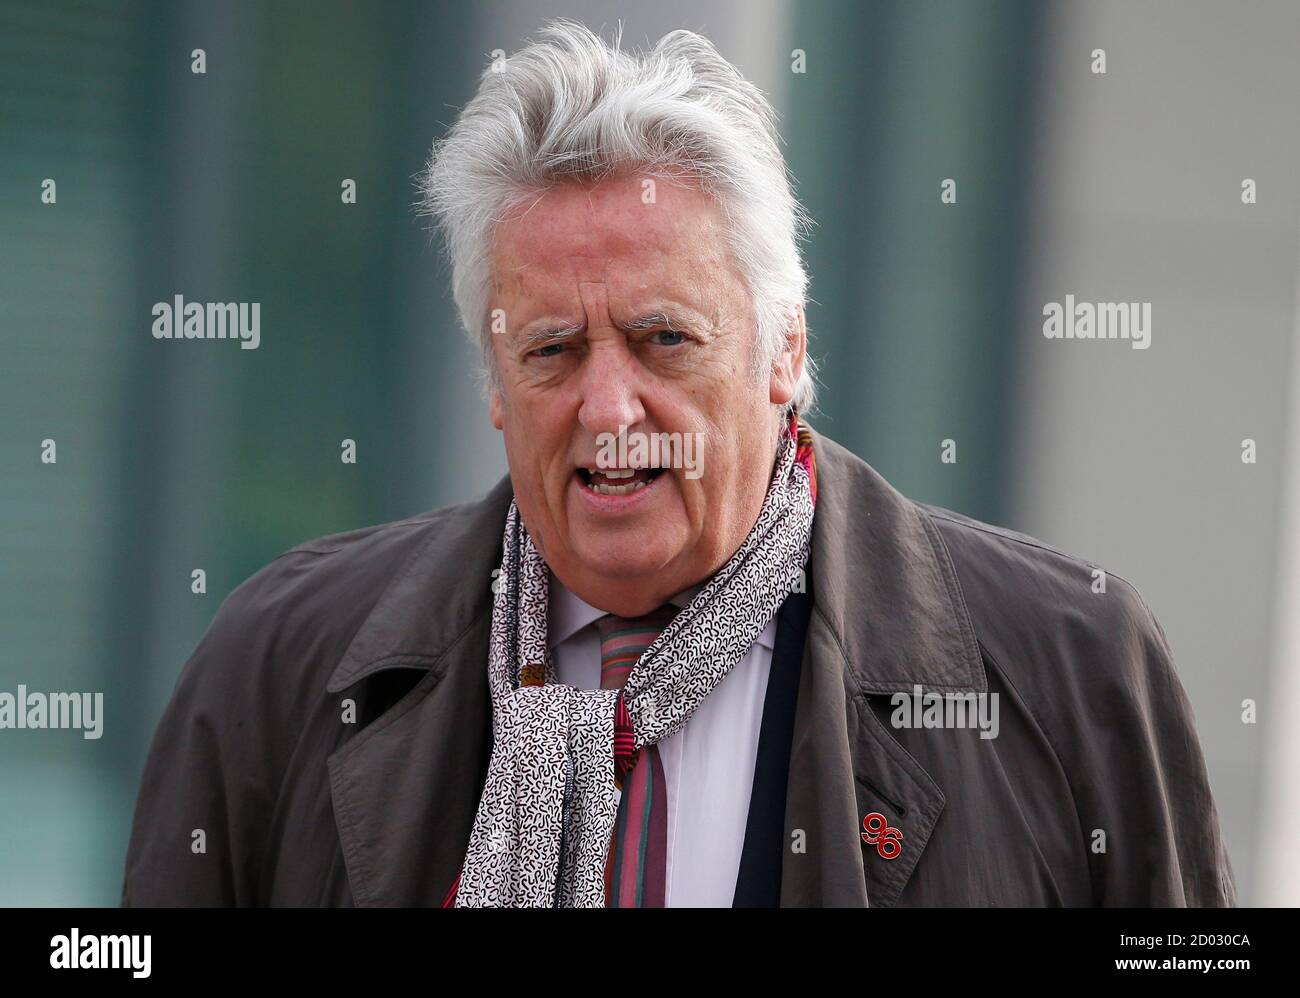 Michael Mansfield QC arrives for the opening day of the Hillsborough Inquest in Warrington, northern England March 31, 2014. New inquests into the 1989 Hillsborough disaster, that claimed the lives of 96 men, women and children, are scheduled to open today.   REUTERS/Phil Noble   (BRITAIN - Tags: DISASTER SOCIETY SPORT SOCCER) Stock Photo